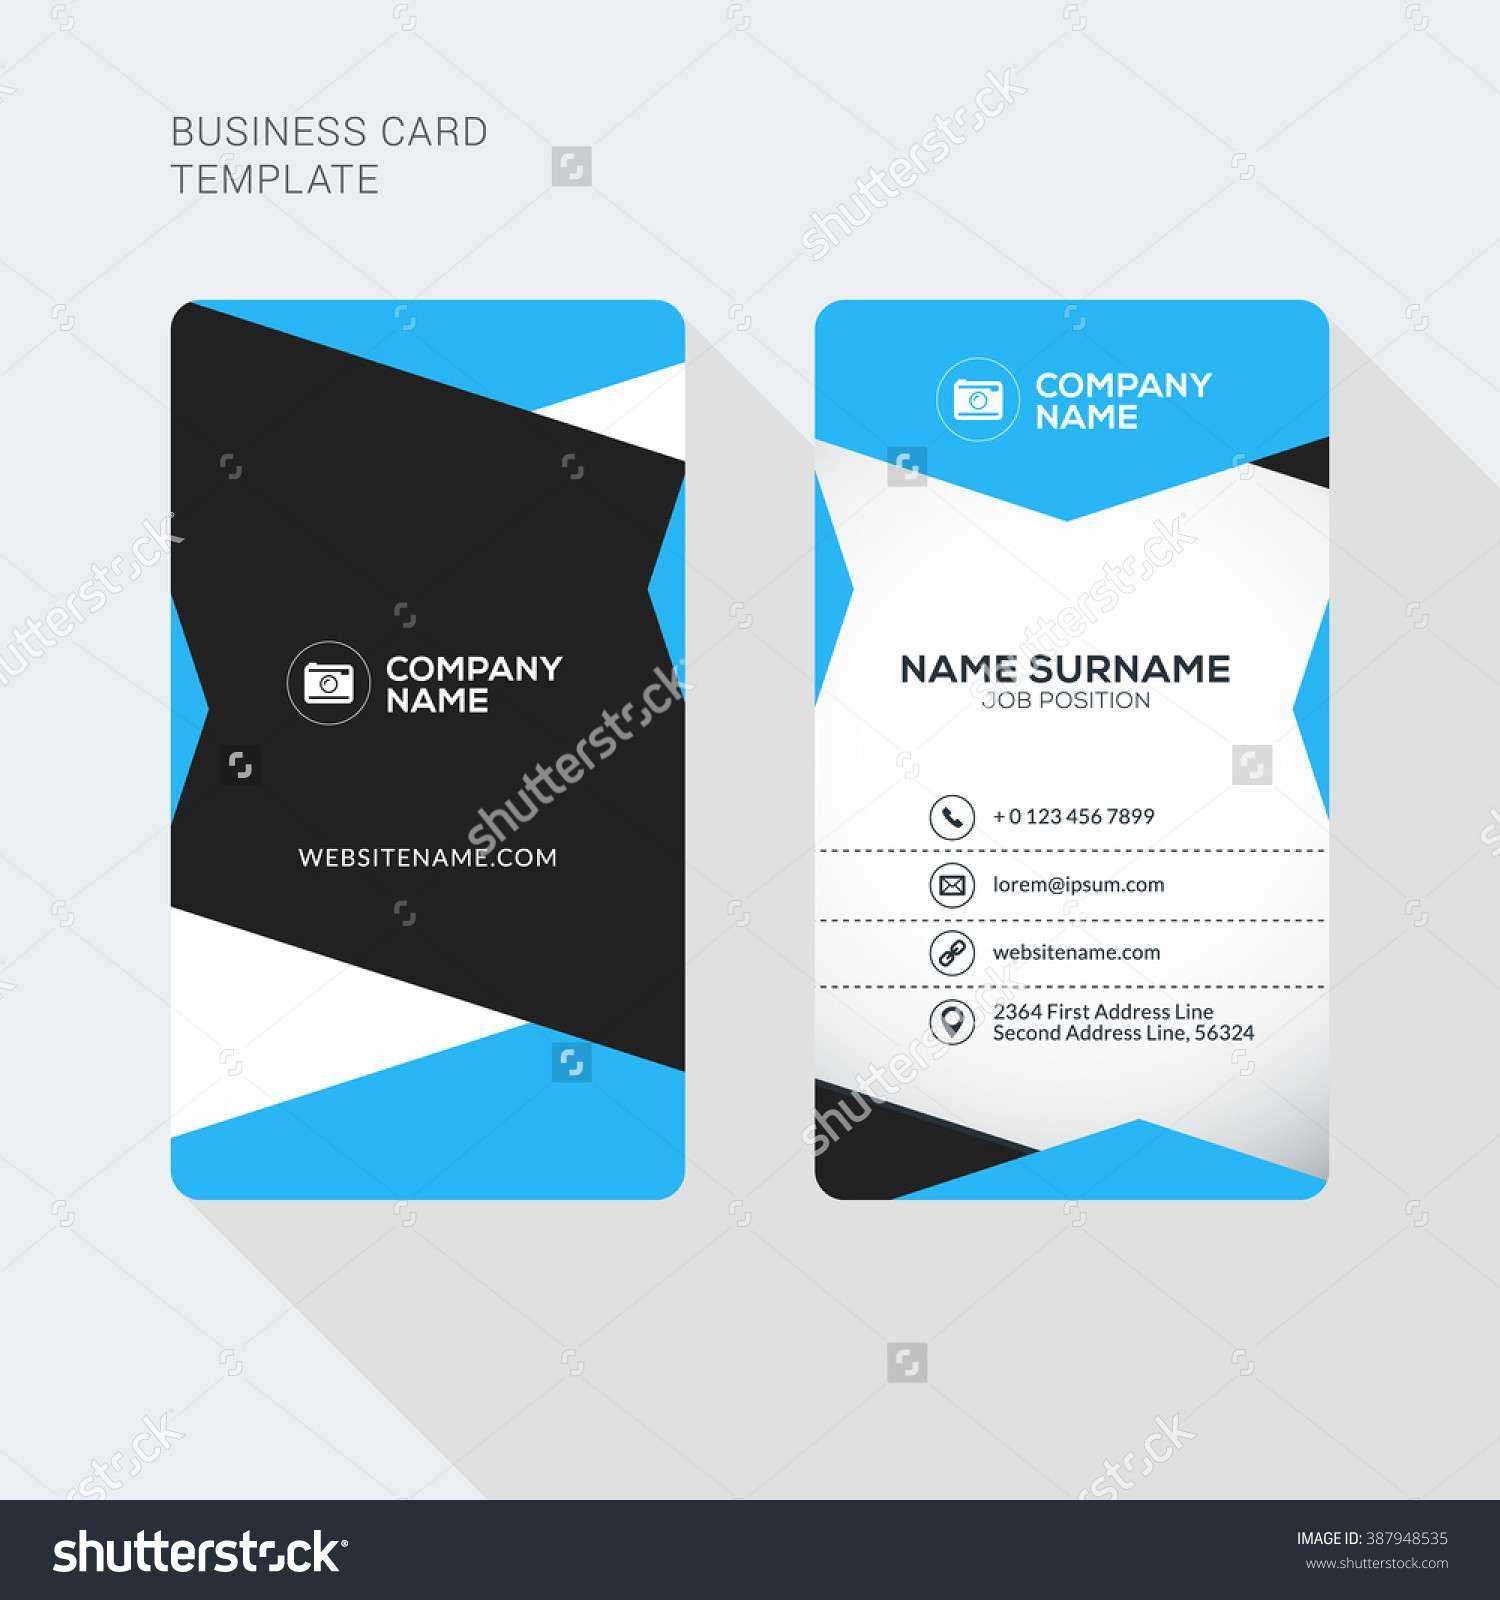 2 Sided Business Card Template Word – Caquetapositivo For 2 Sided Business Card Template Word